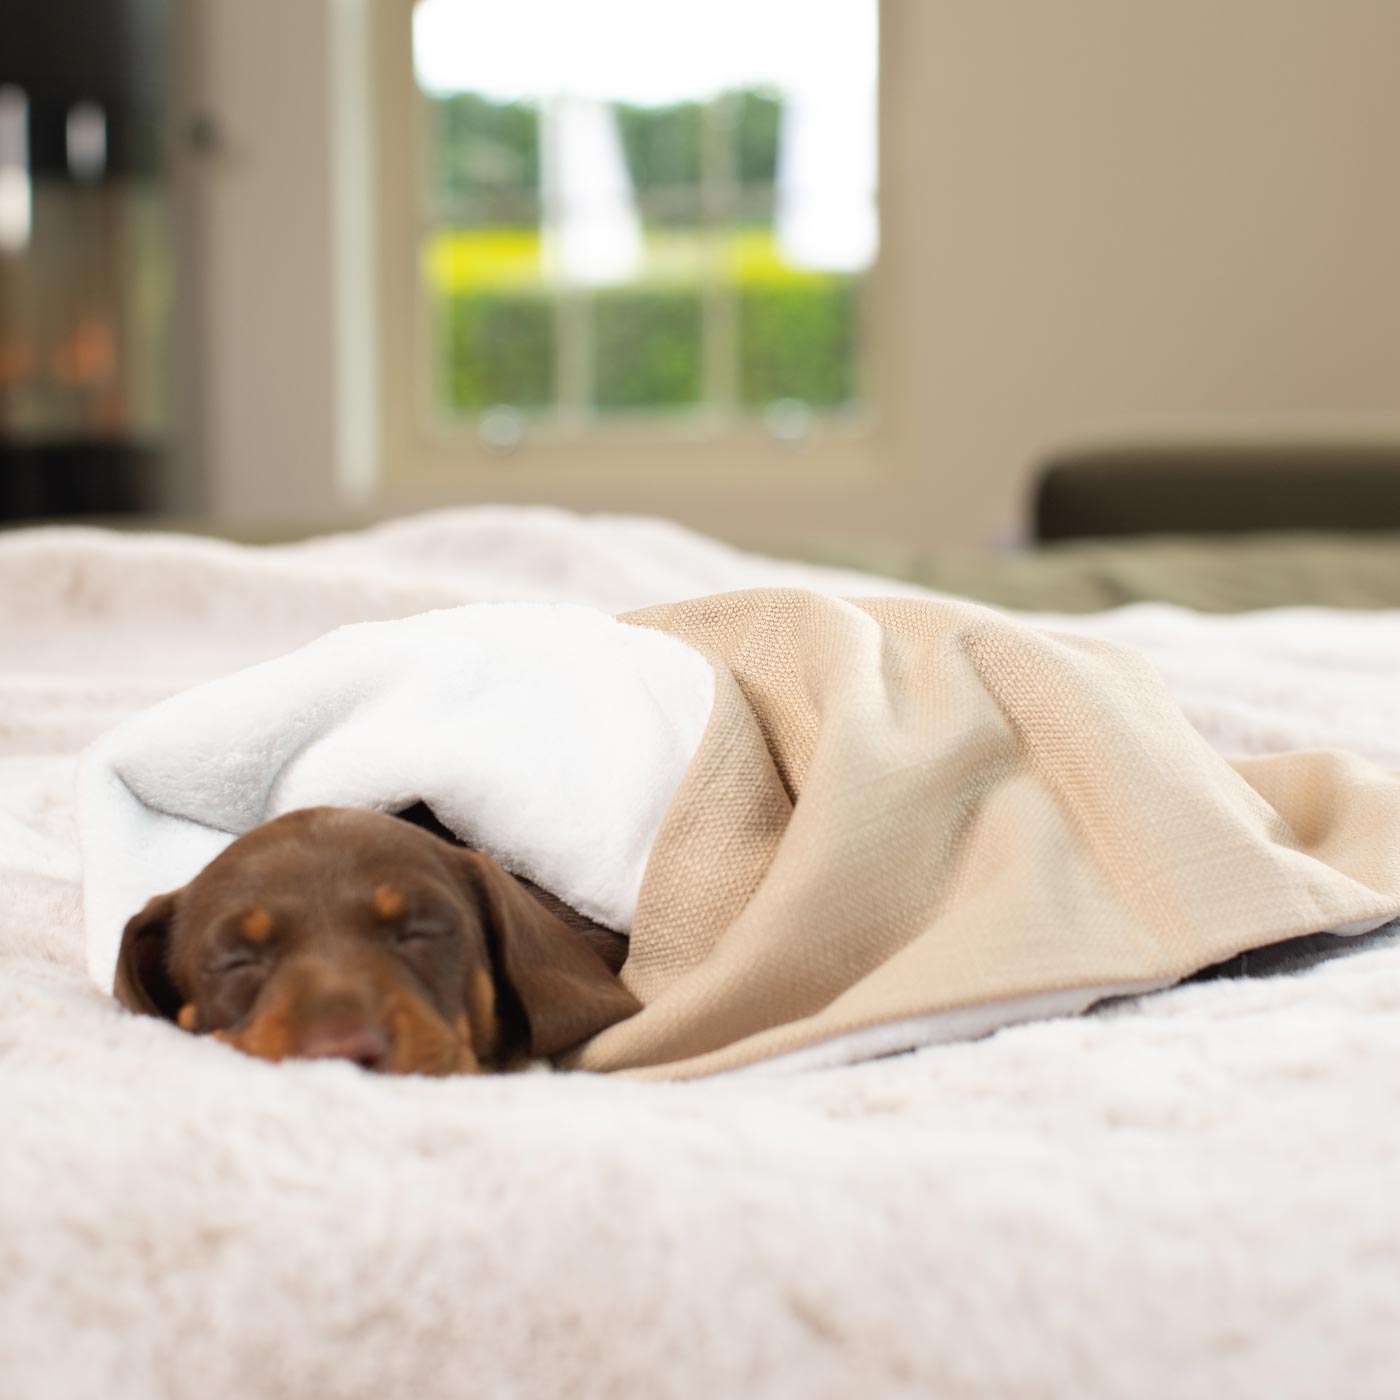 Luxury Savanna Pet Blanket collection, In Stunning Savanna Oatmeal. The Perfect Blanket For Dogs, Available at Lords & Labradors US